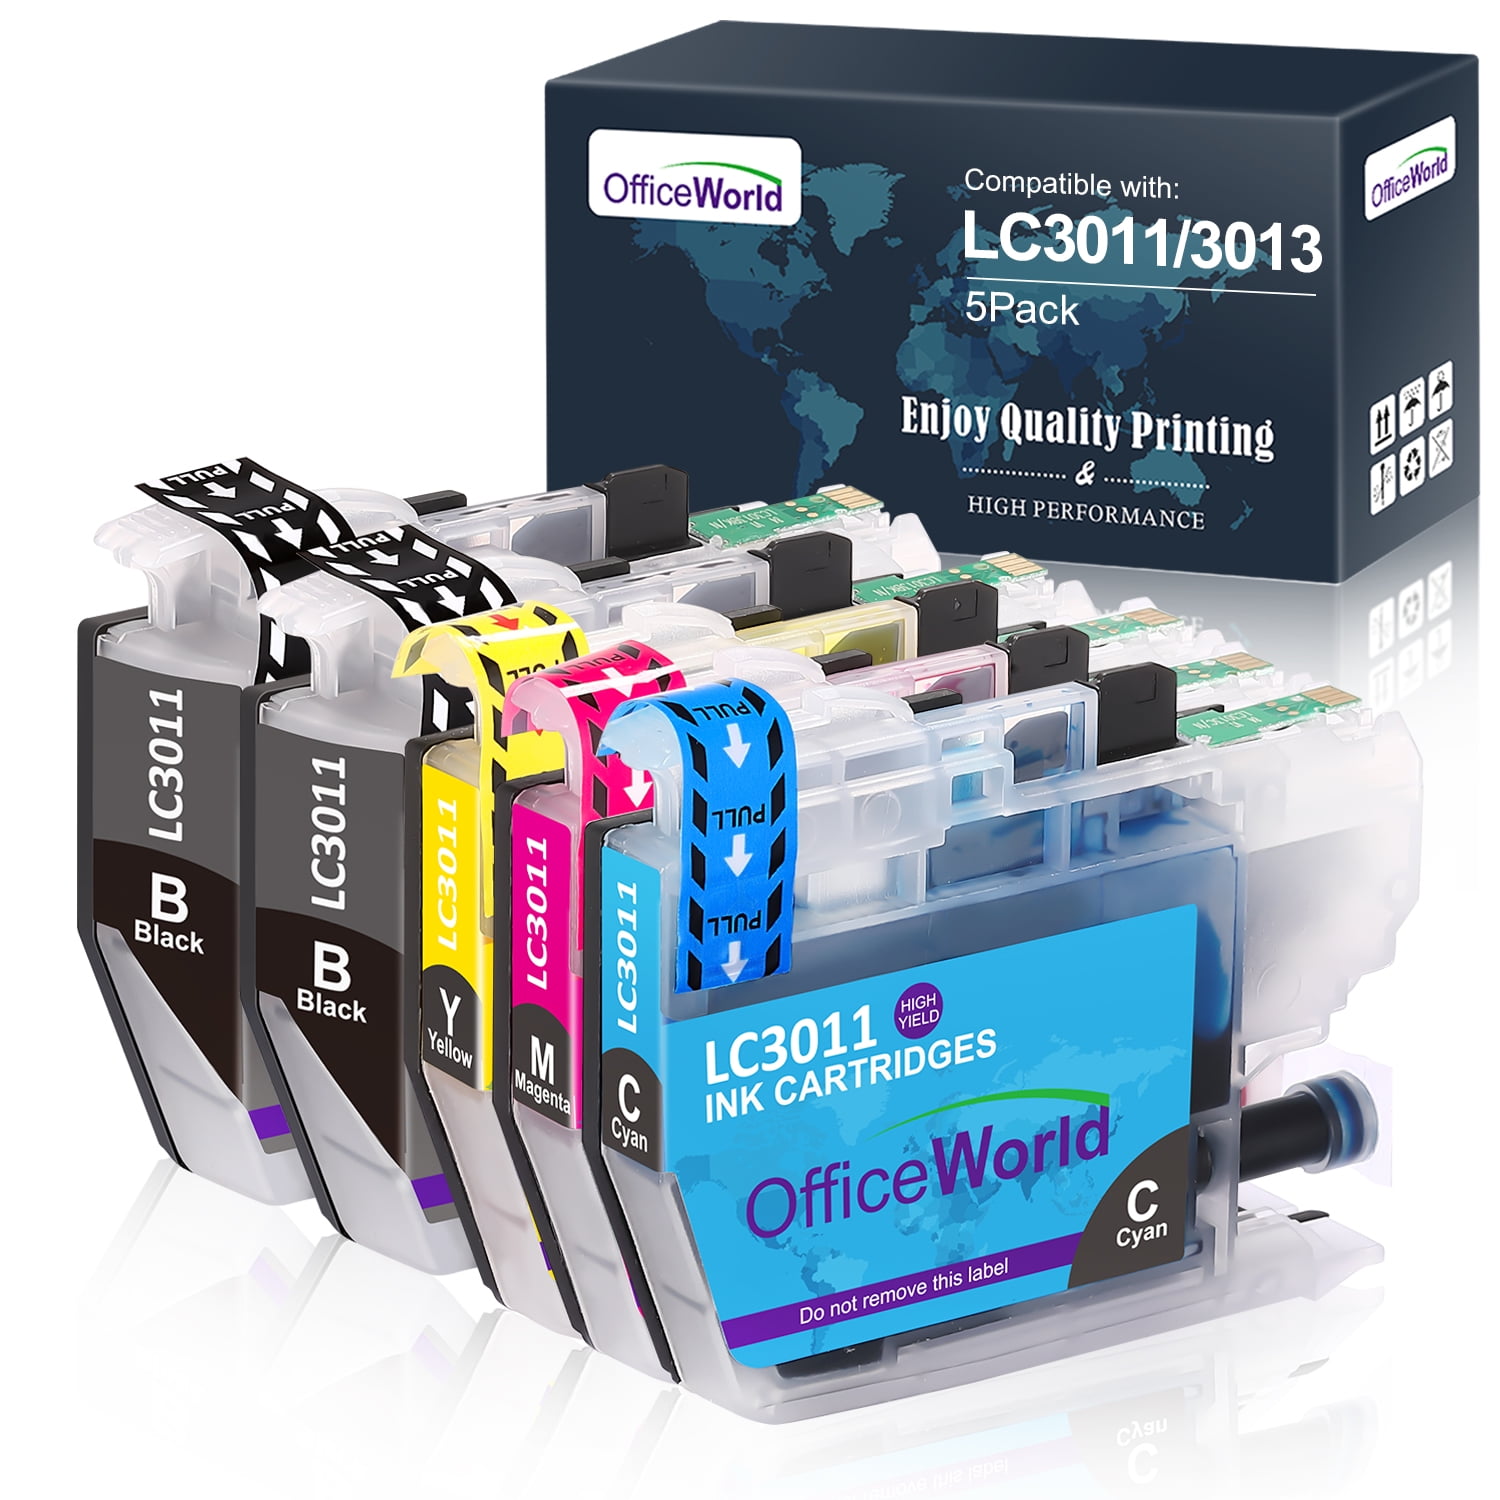 2 Black, 2 Cyan, 2 Magenta, 2 Yellow, 8-Pack Compatible Ink Cartridges Replacement for LC3013 LC3011 High Yield for MFC-J491DW MFC-J895DW MFC-J690DW MFC-J497DW Printer 